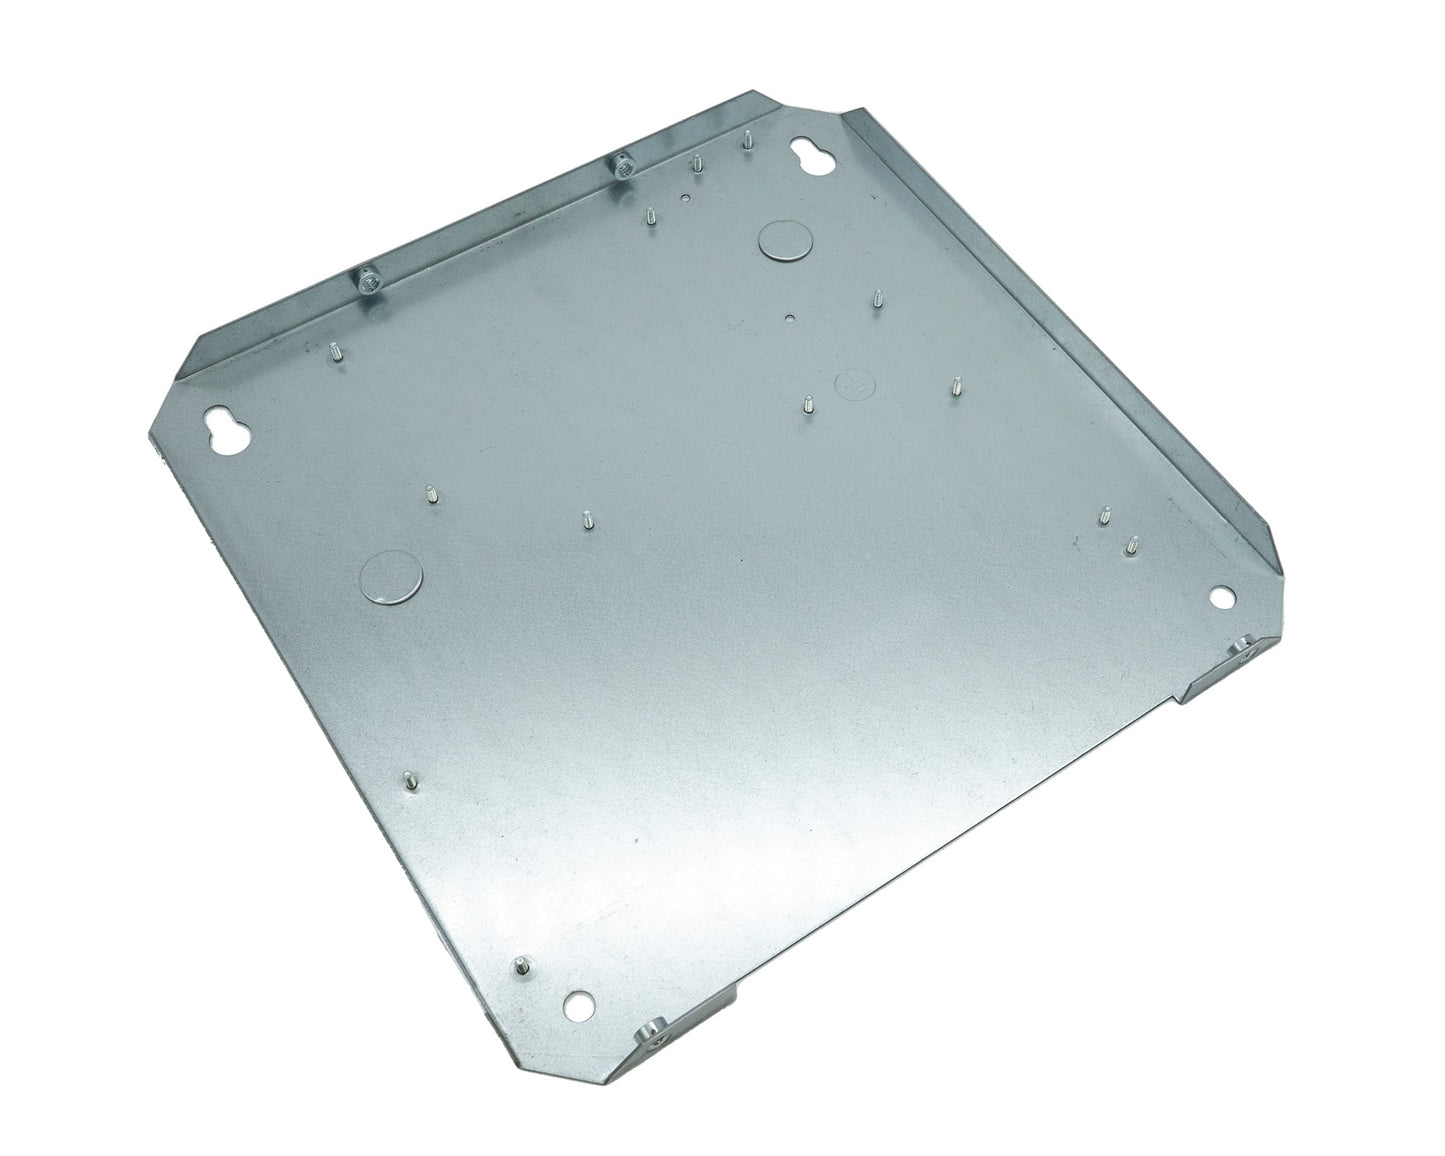 base plate for P3-12S bathroom hand dryer